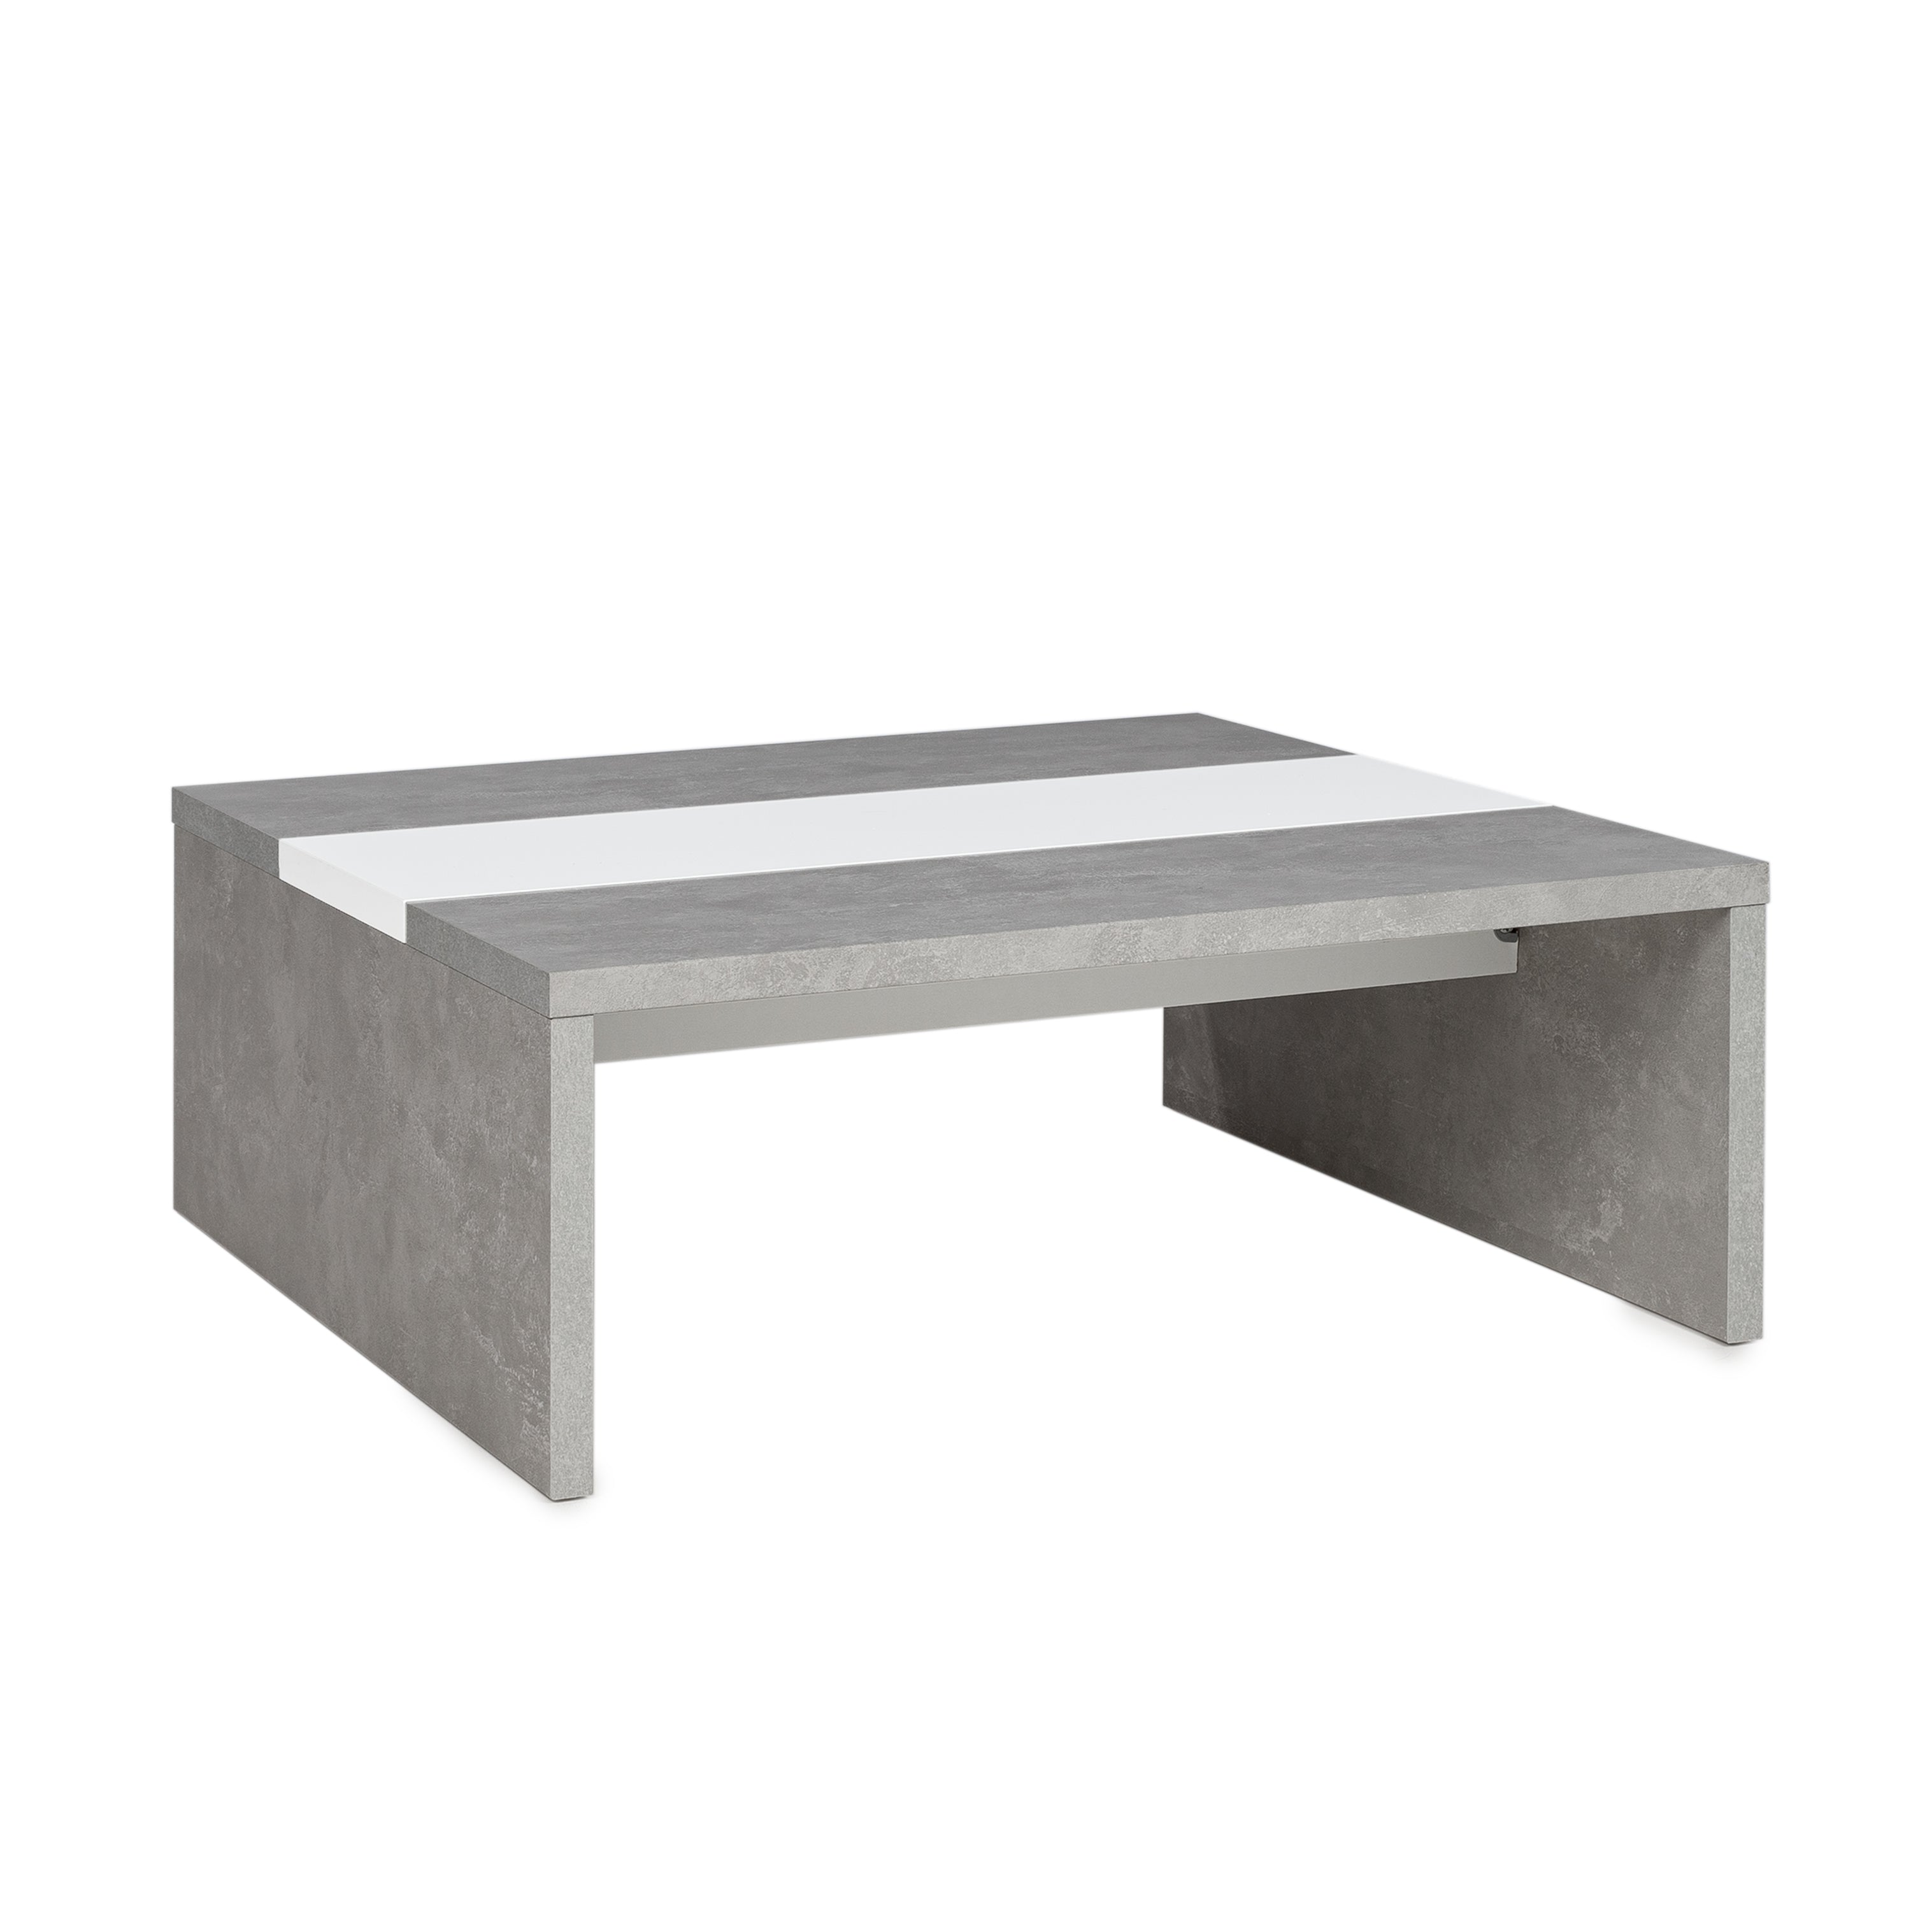 Modern Square Coffee Table in Concrete and Glossy White Made in France - MUFFIN